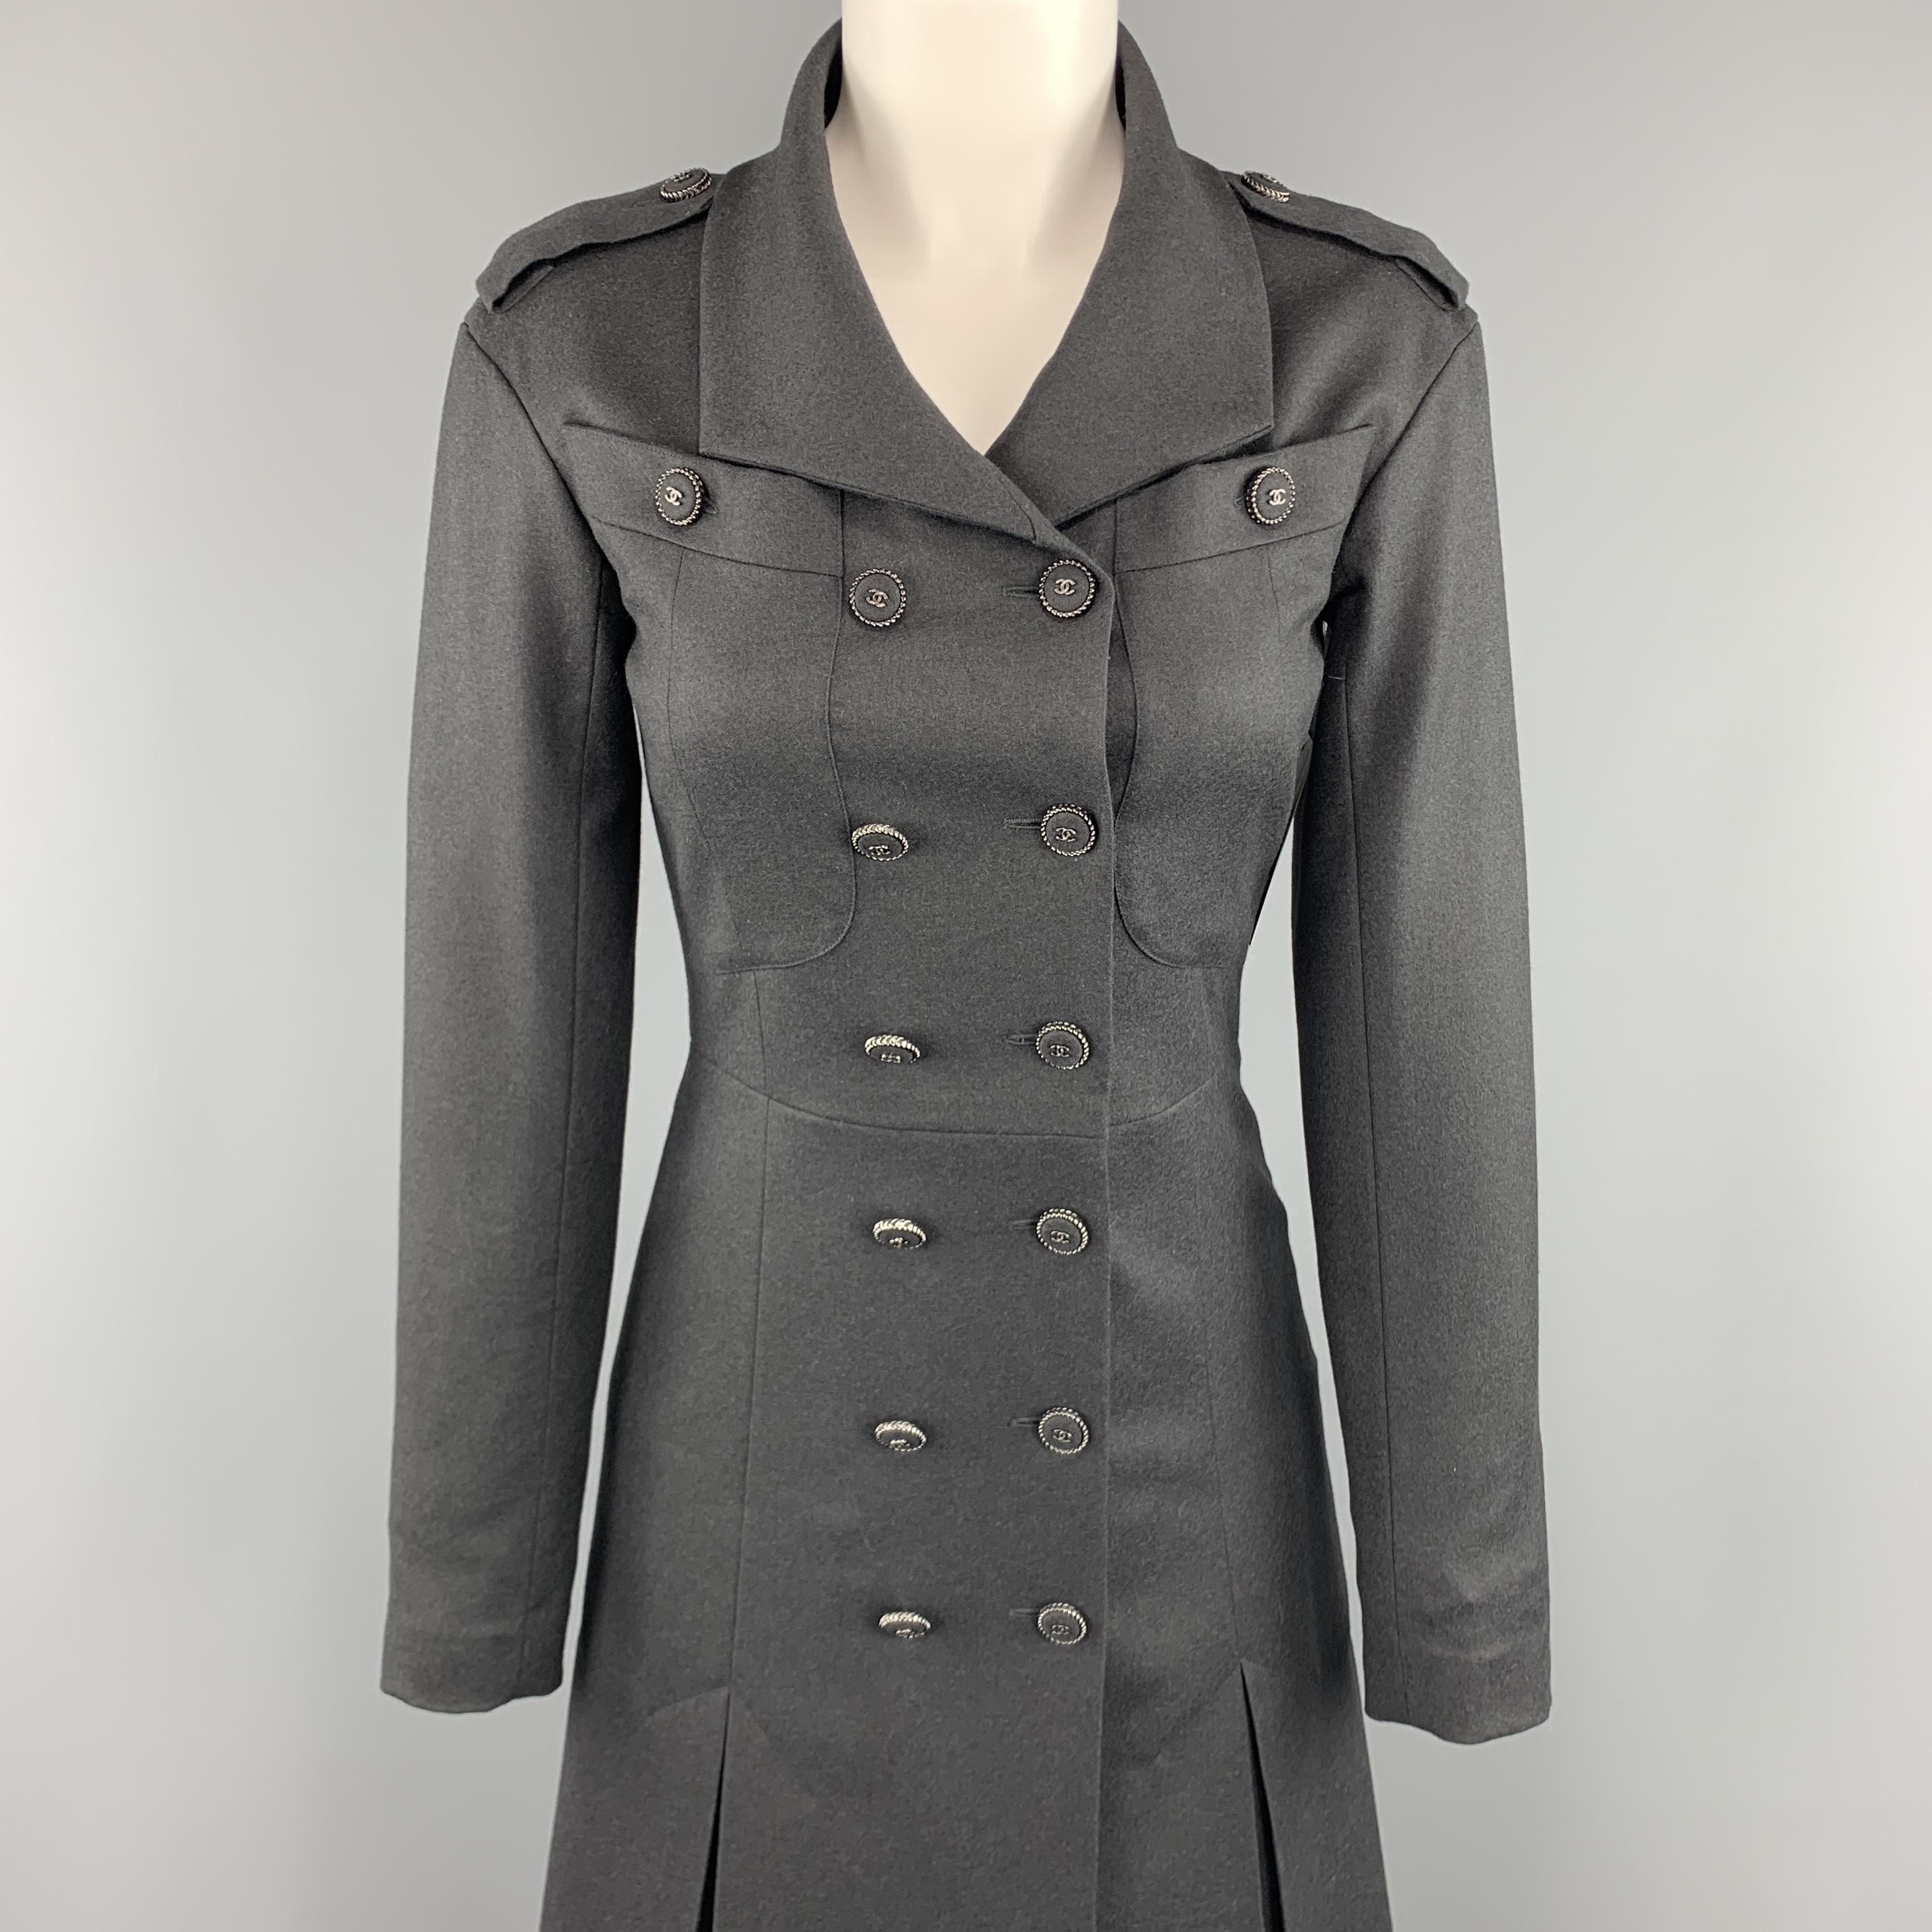 CHANEL trench coat comes in charcoal gray wool cashmere twill with a geometric lapel, epaulets, breast pockets, double breasted front with silver tone metal fabric CC logo buttons, three button cuffs, and A line skirt with box pleated hem. Made in